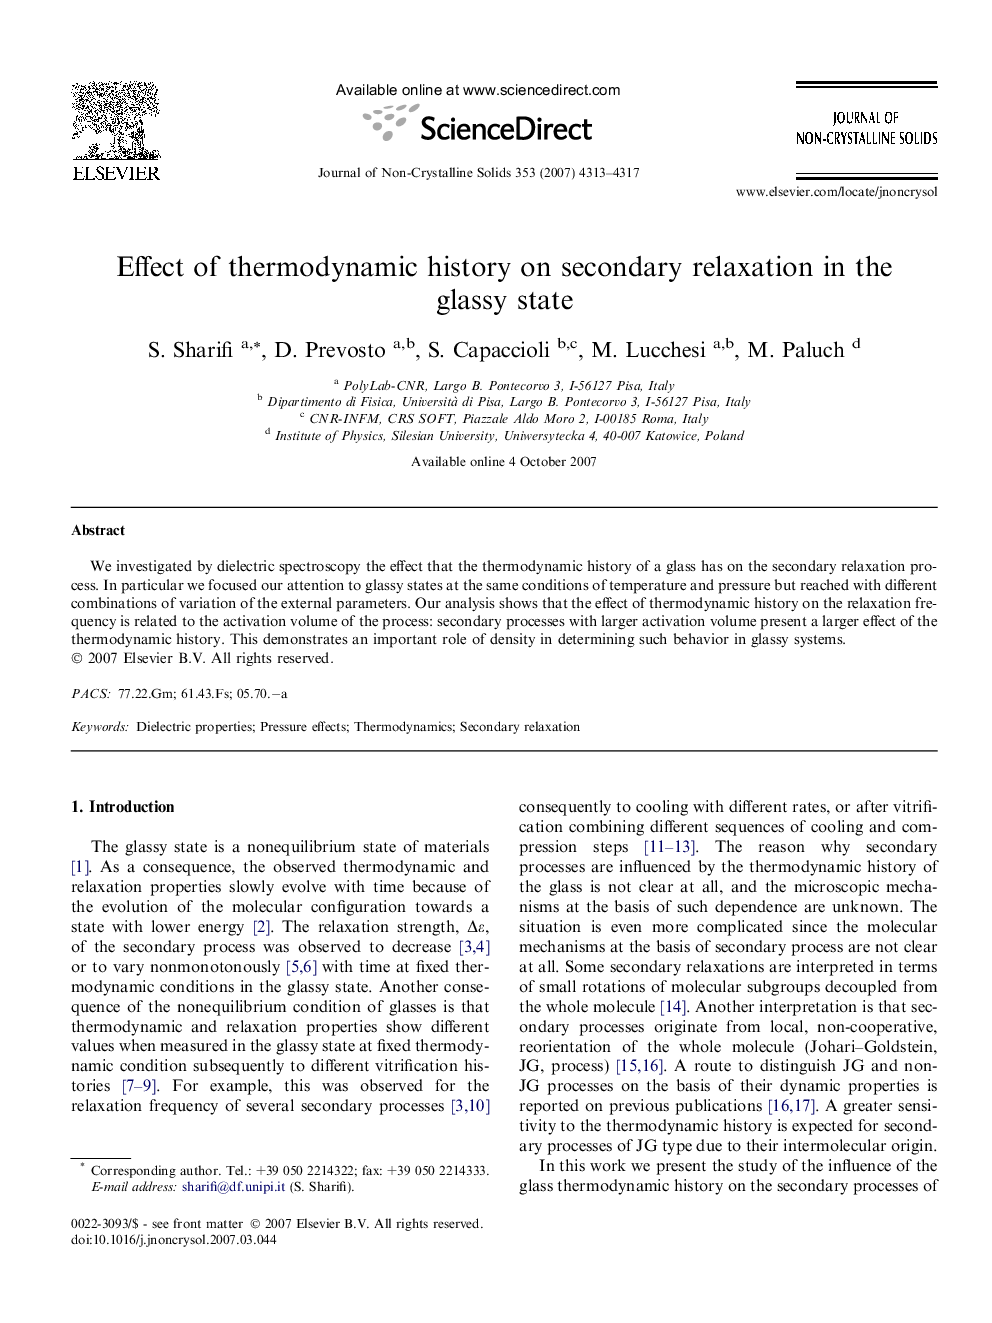 Effect of thermodynamic history on secondary relaxation in the glassy state